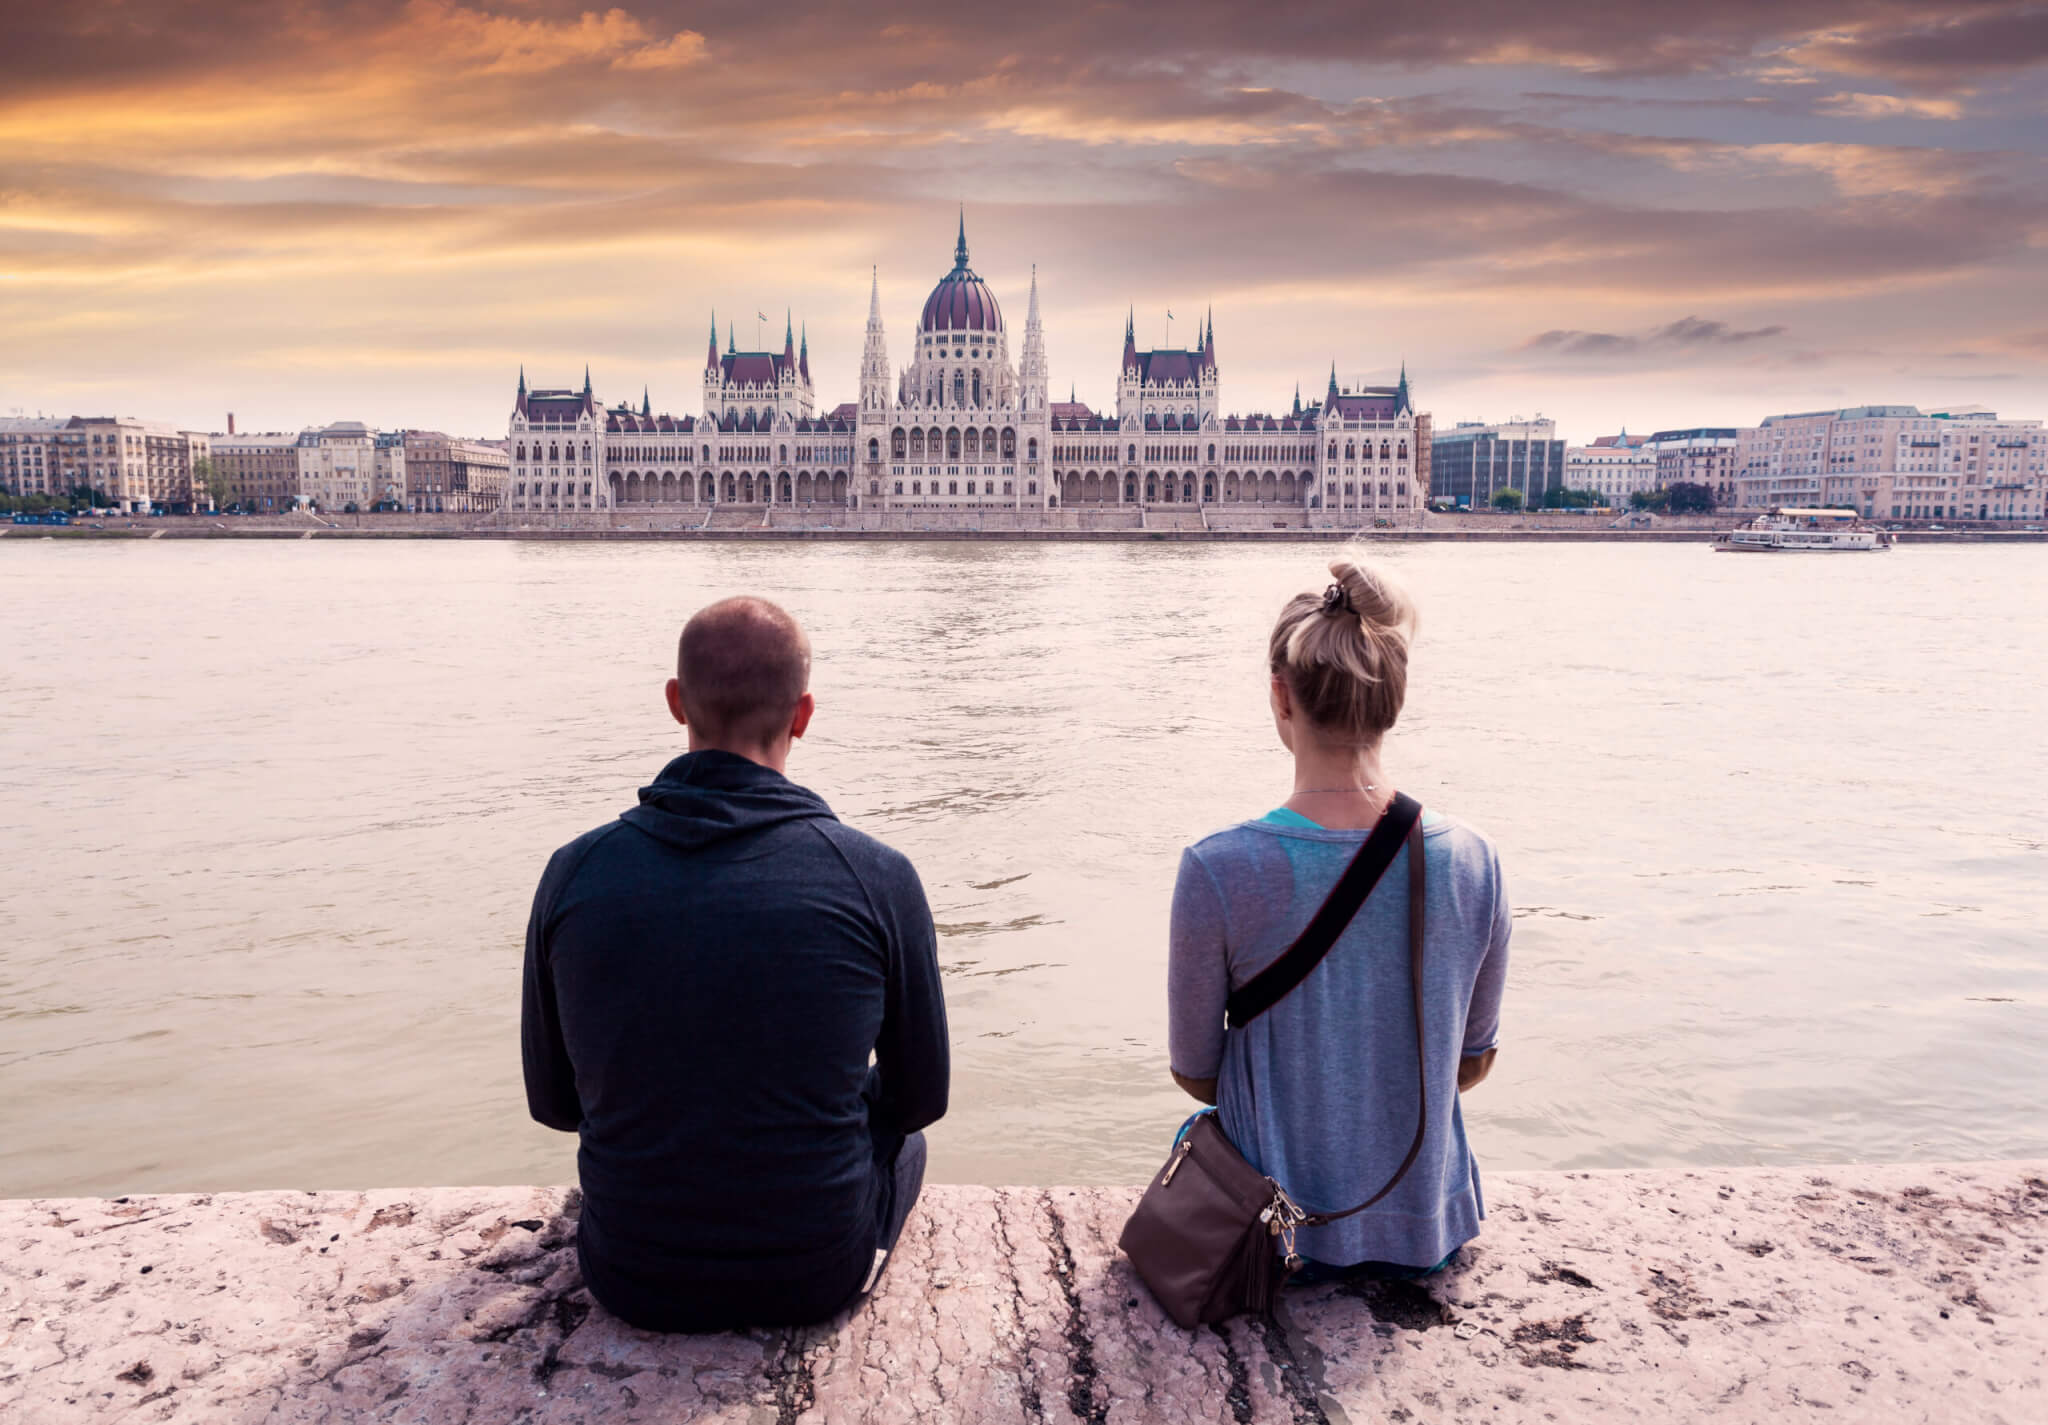 A couple in love sits on the embankment and enjoys the view of Parliament against the background of a sunset in Budapest, Hungary